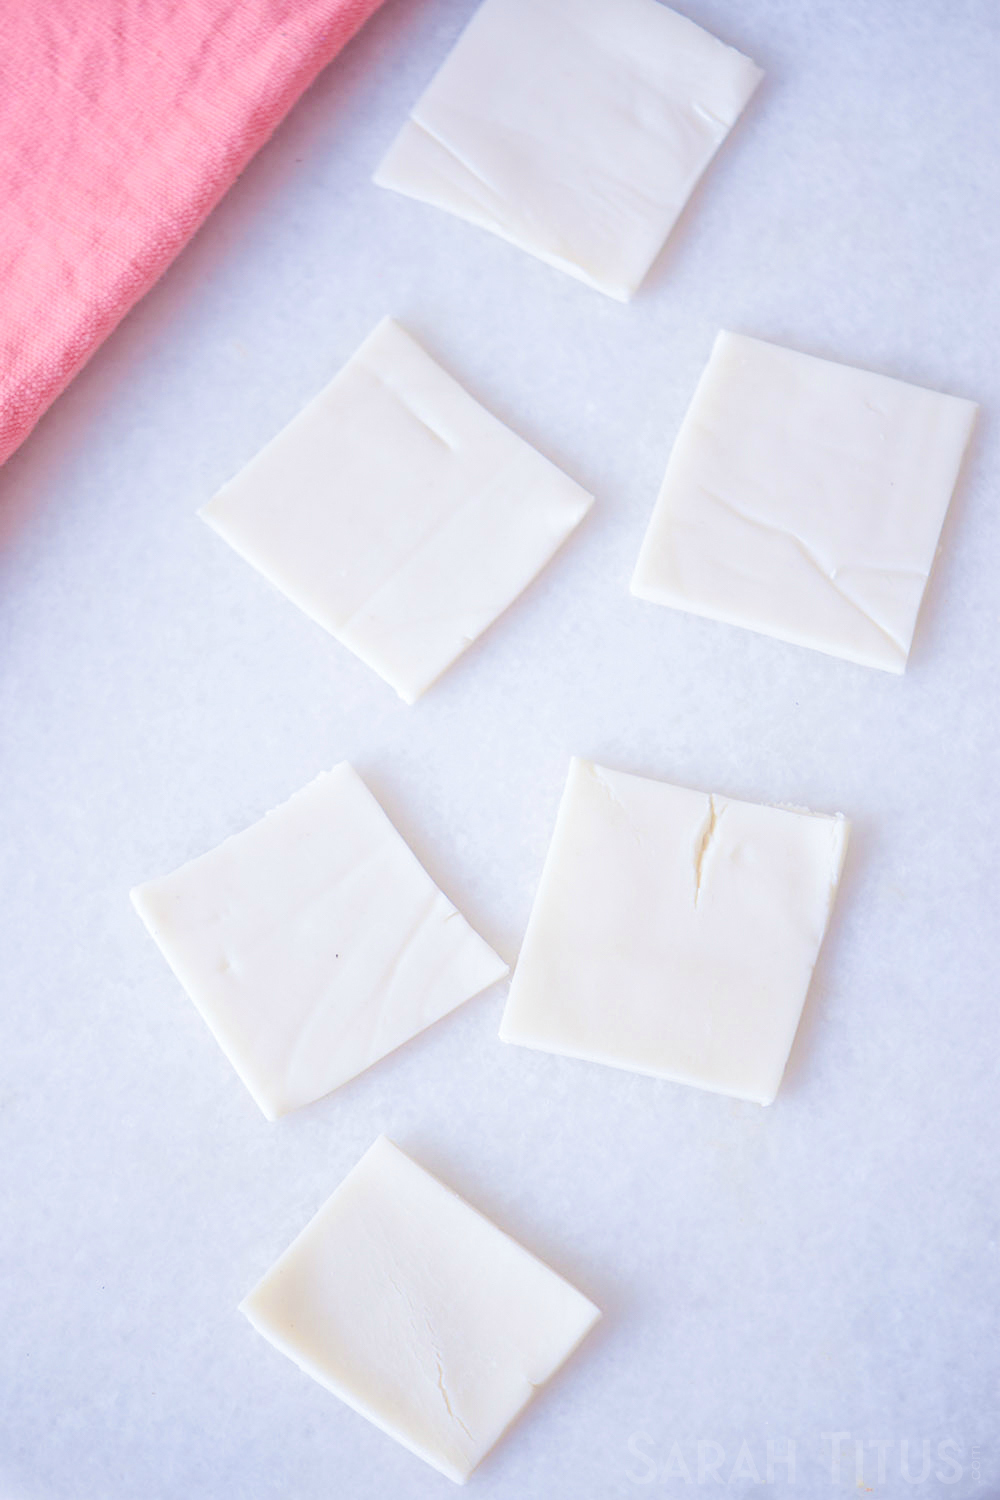 Puffed pastry sheets cut into little squares on a white counter with a pink towel